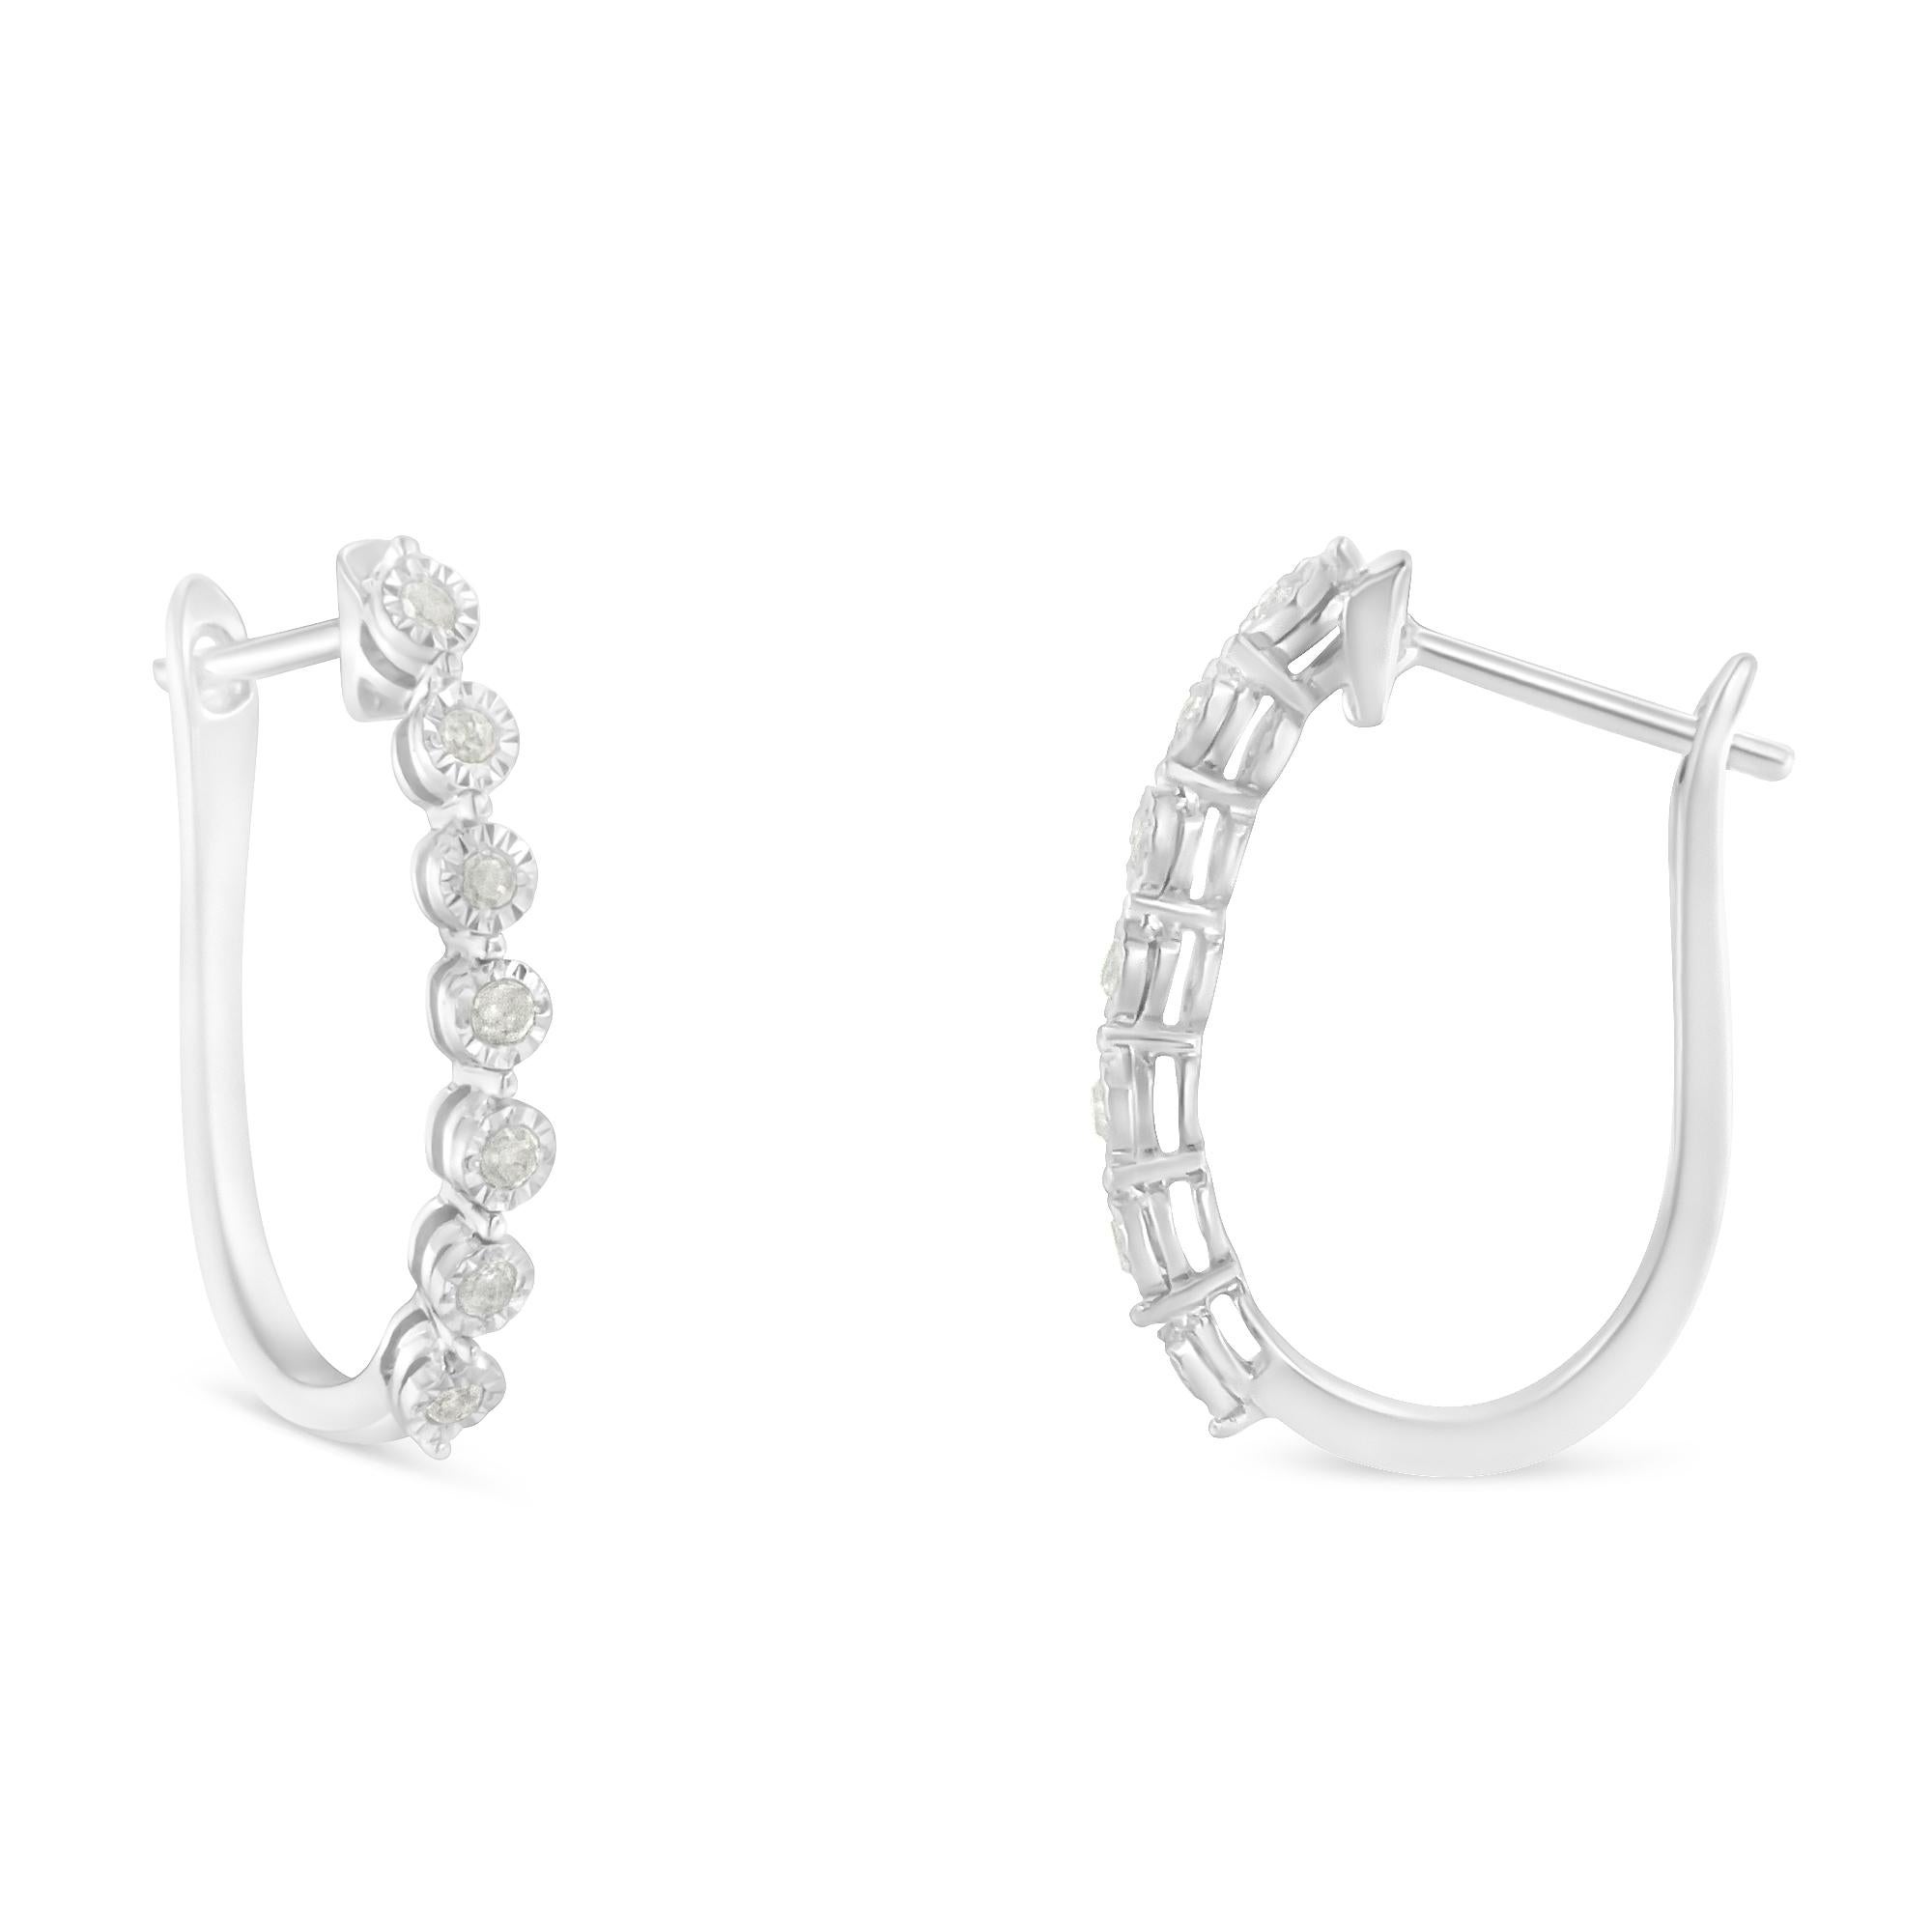 Elegant and timeless, these gorgeous sterling silver diamond hoop earrings feature 0.50 carat total weight of round diamonds. Each U shaped earring is set with seven stones in illusion settings. The fourteen round diamonds are each set in the center